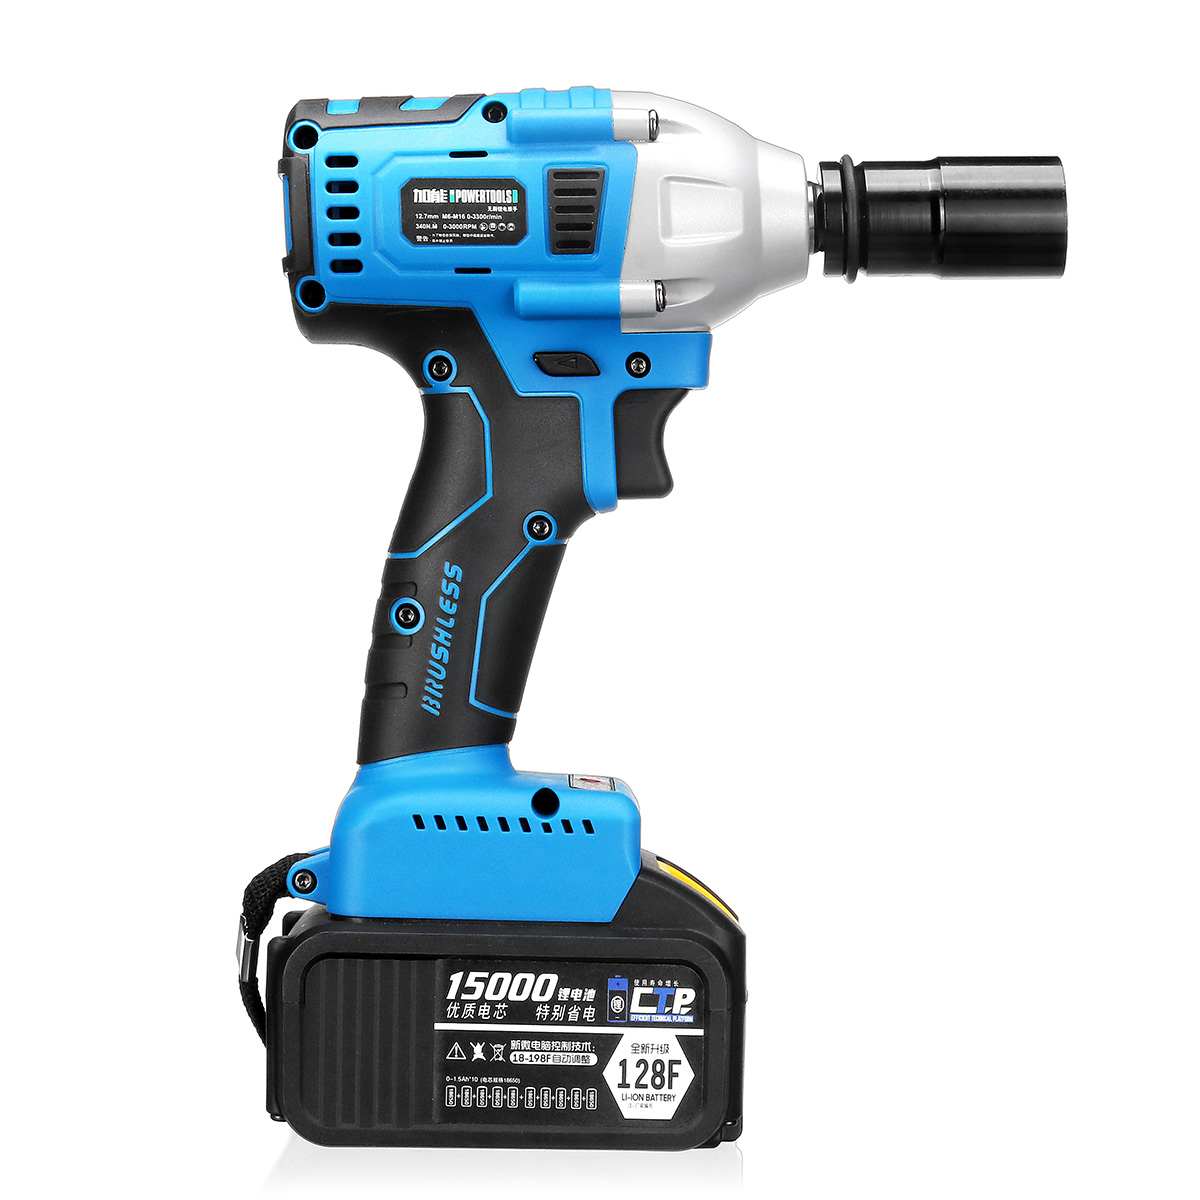 15000mAh-Electric-Impact-Wrench-340Nm-Cordless-Brushless-with-2-Lithium-Battery-1392865-6